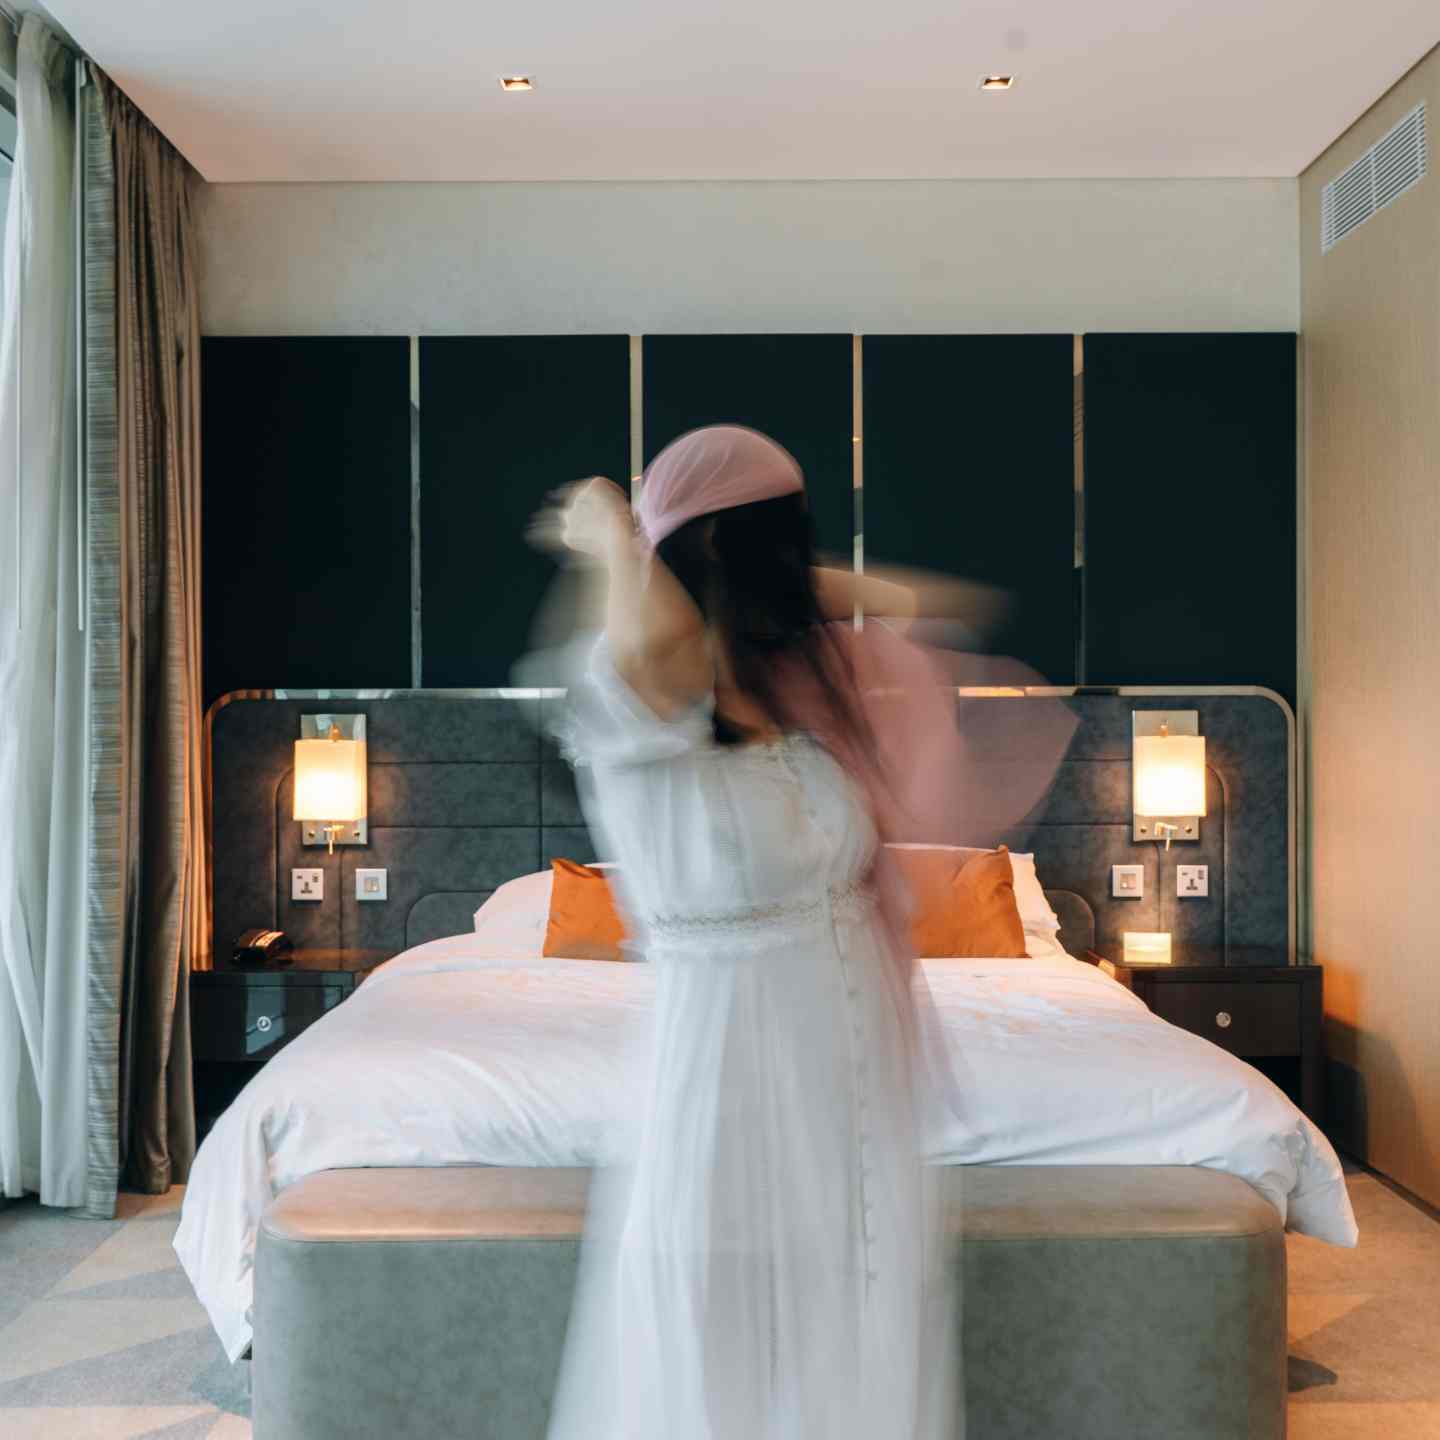 Woman in white dress and light pink headwrap dancing in front of white king bed with grey headboard